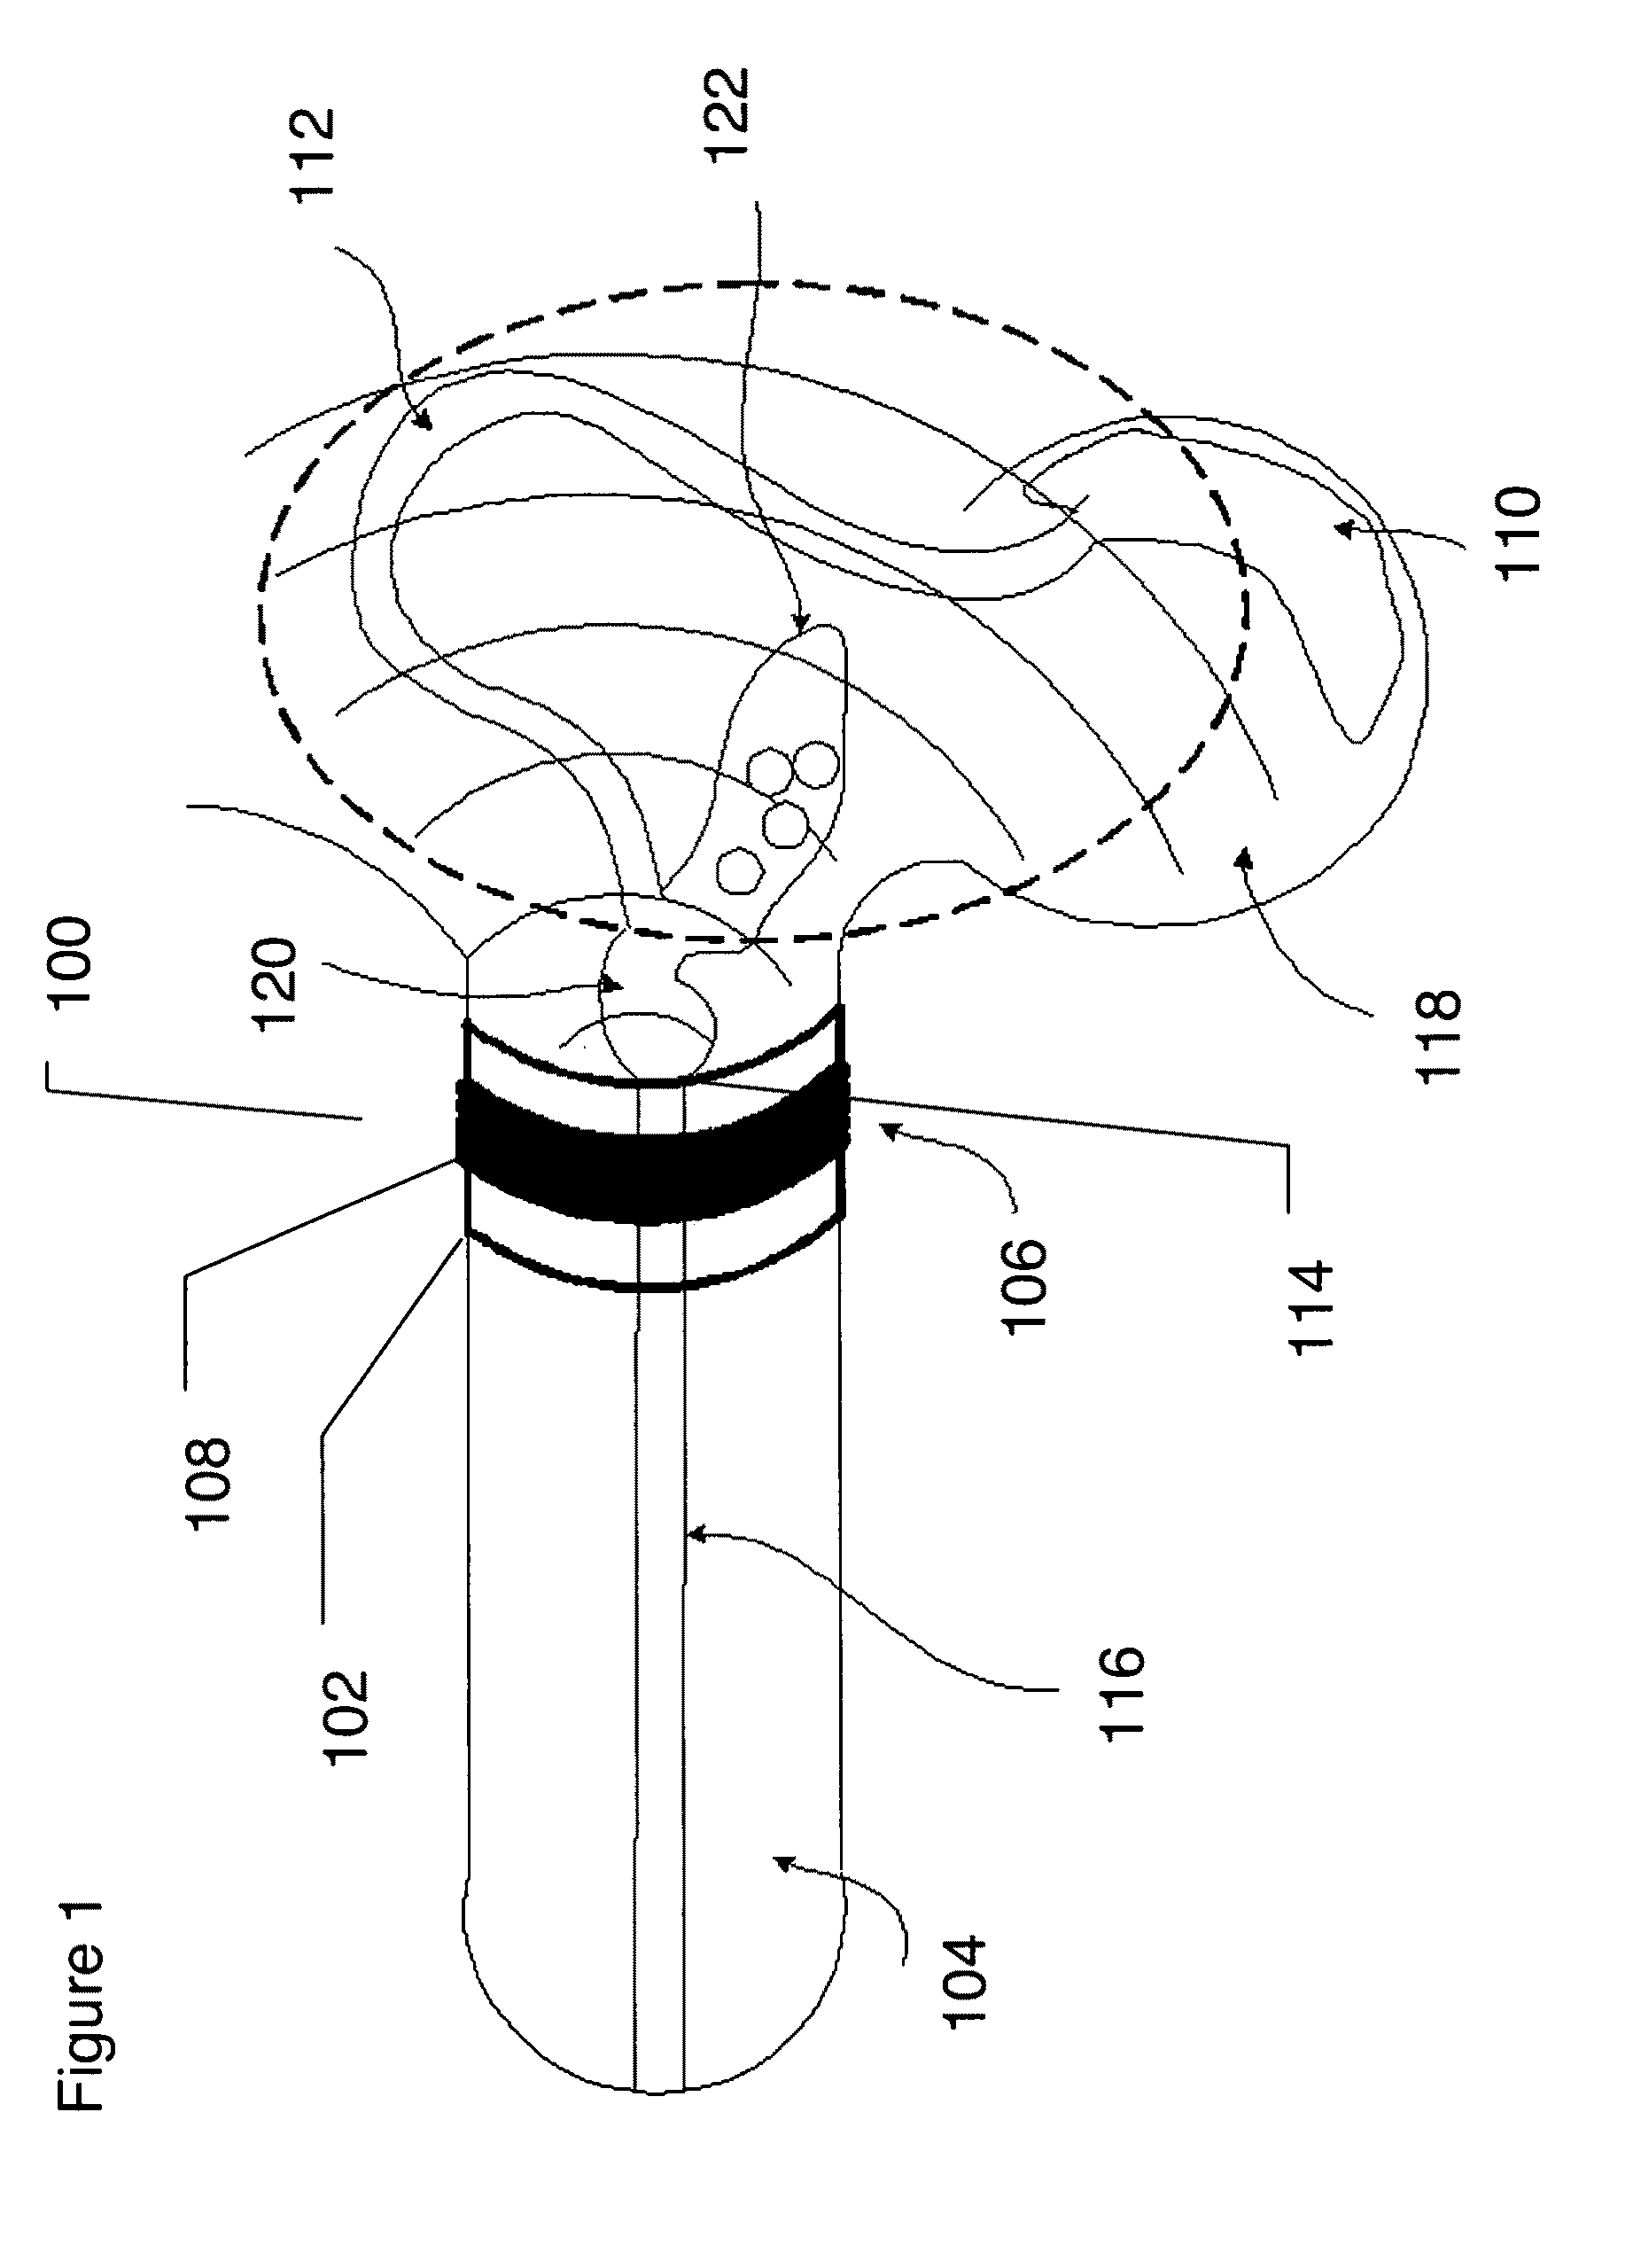 Ultrasonic device for fertility control and management and navigation